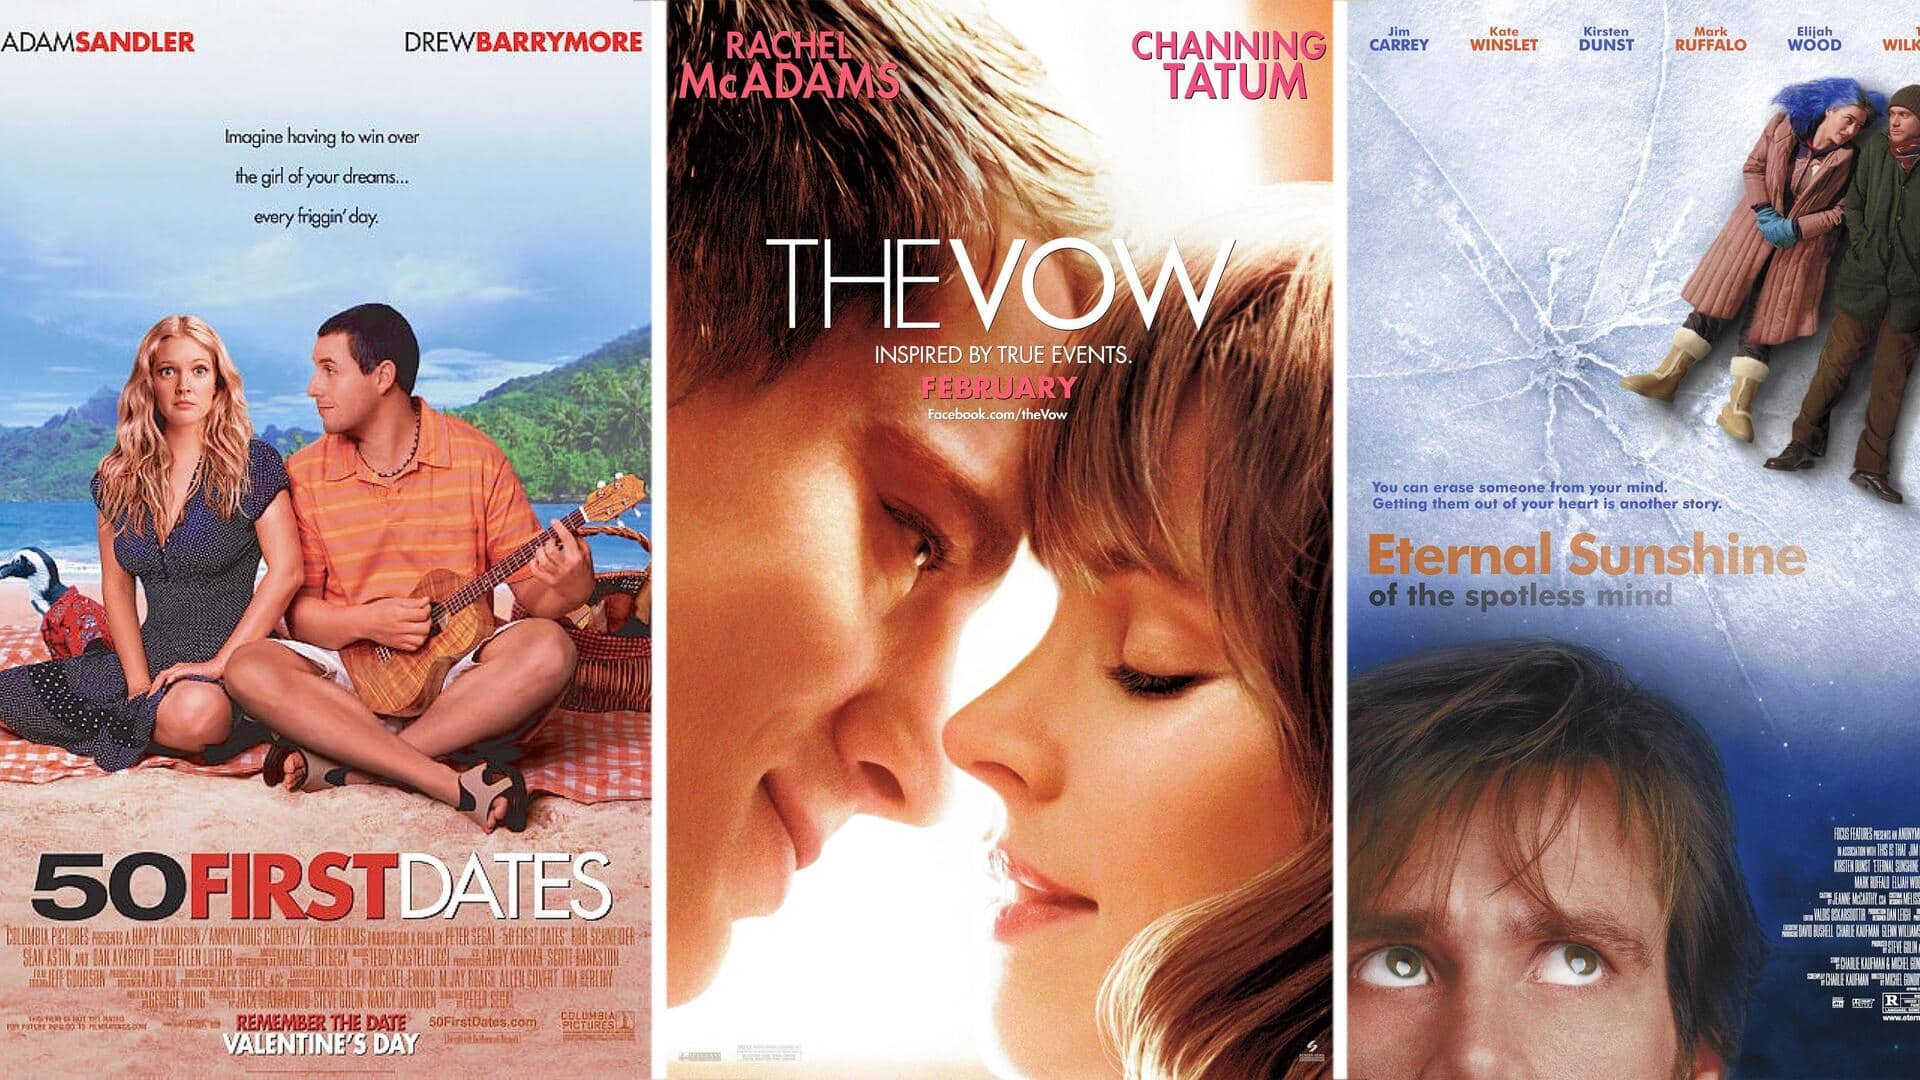 Best Hollywood romantic movies with memory loss twist 